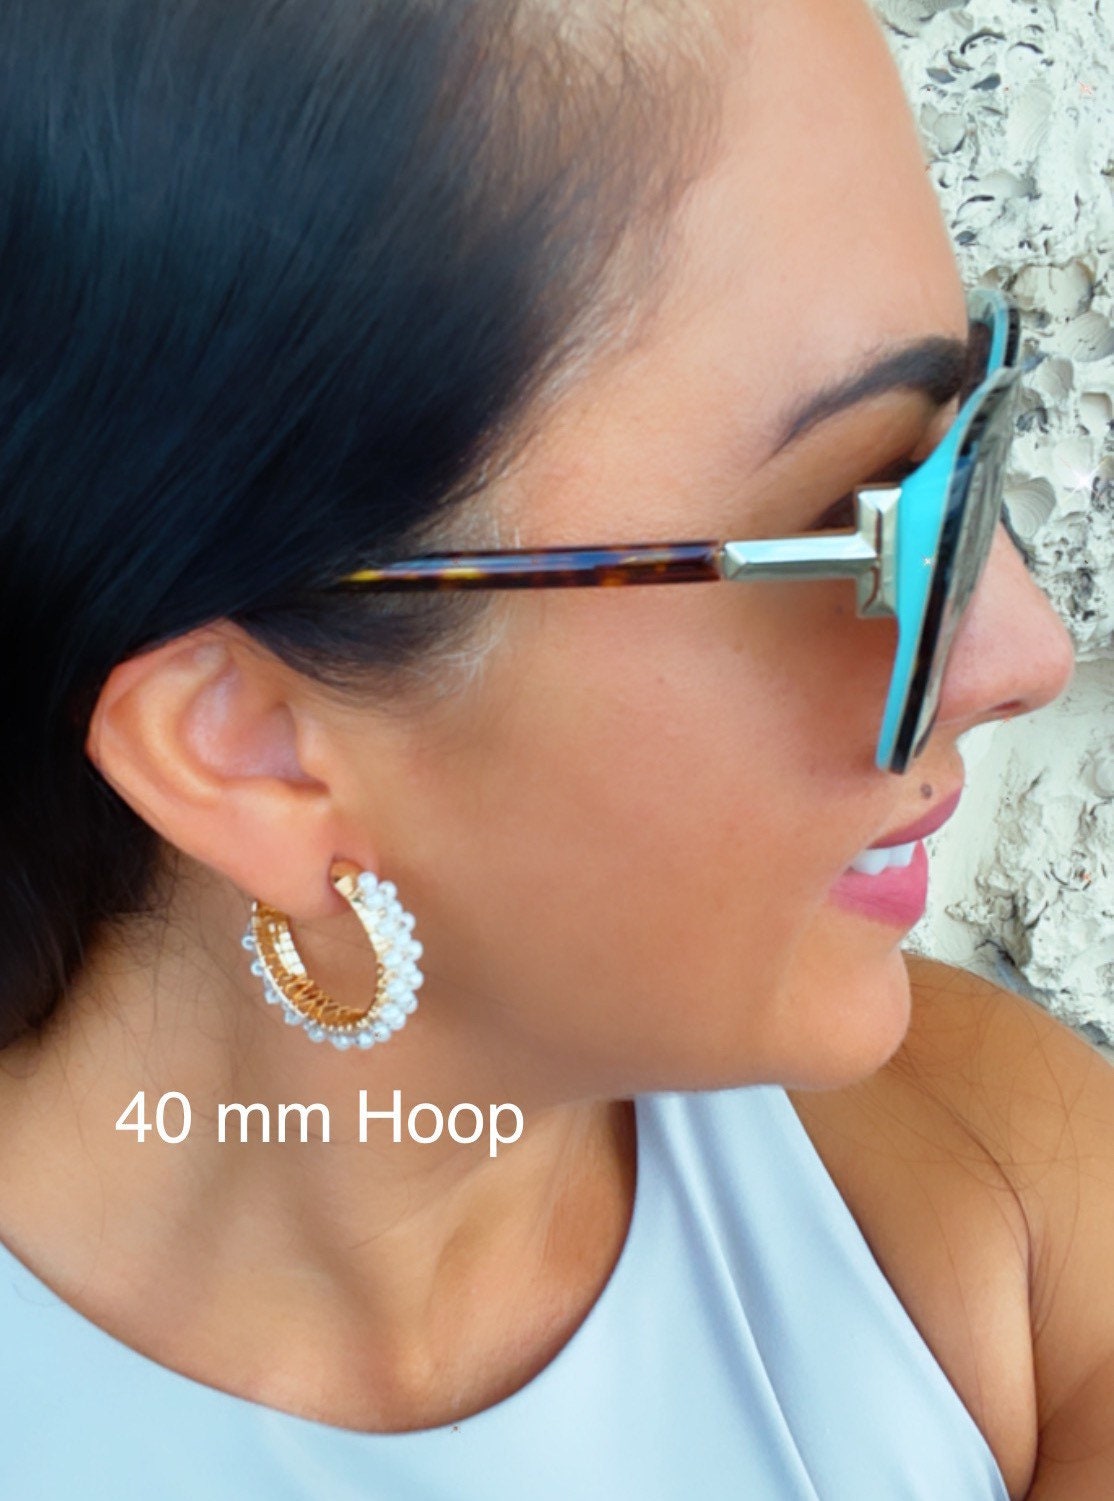 18k Gold filled Hoop Earrings Featuring A Wire Wrap of Pearls Around The Hoop